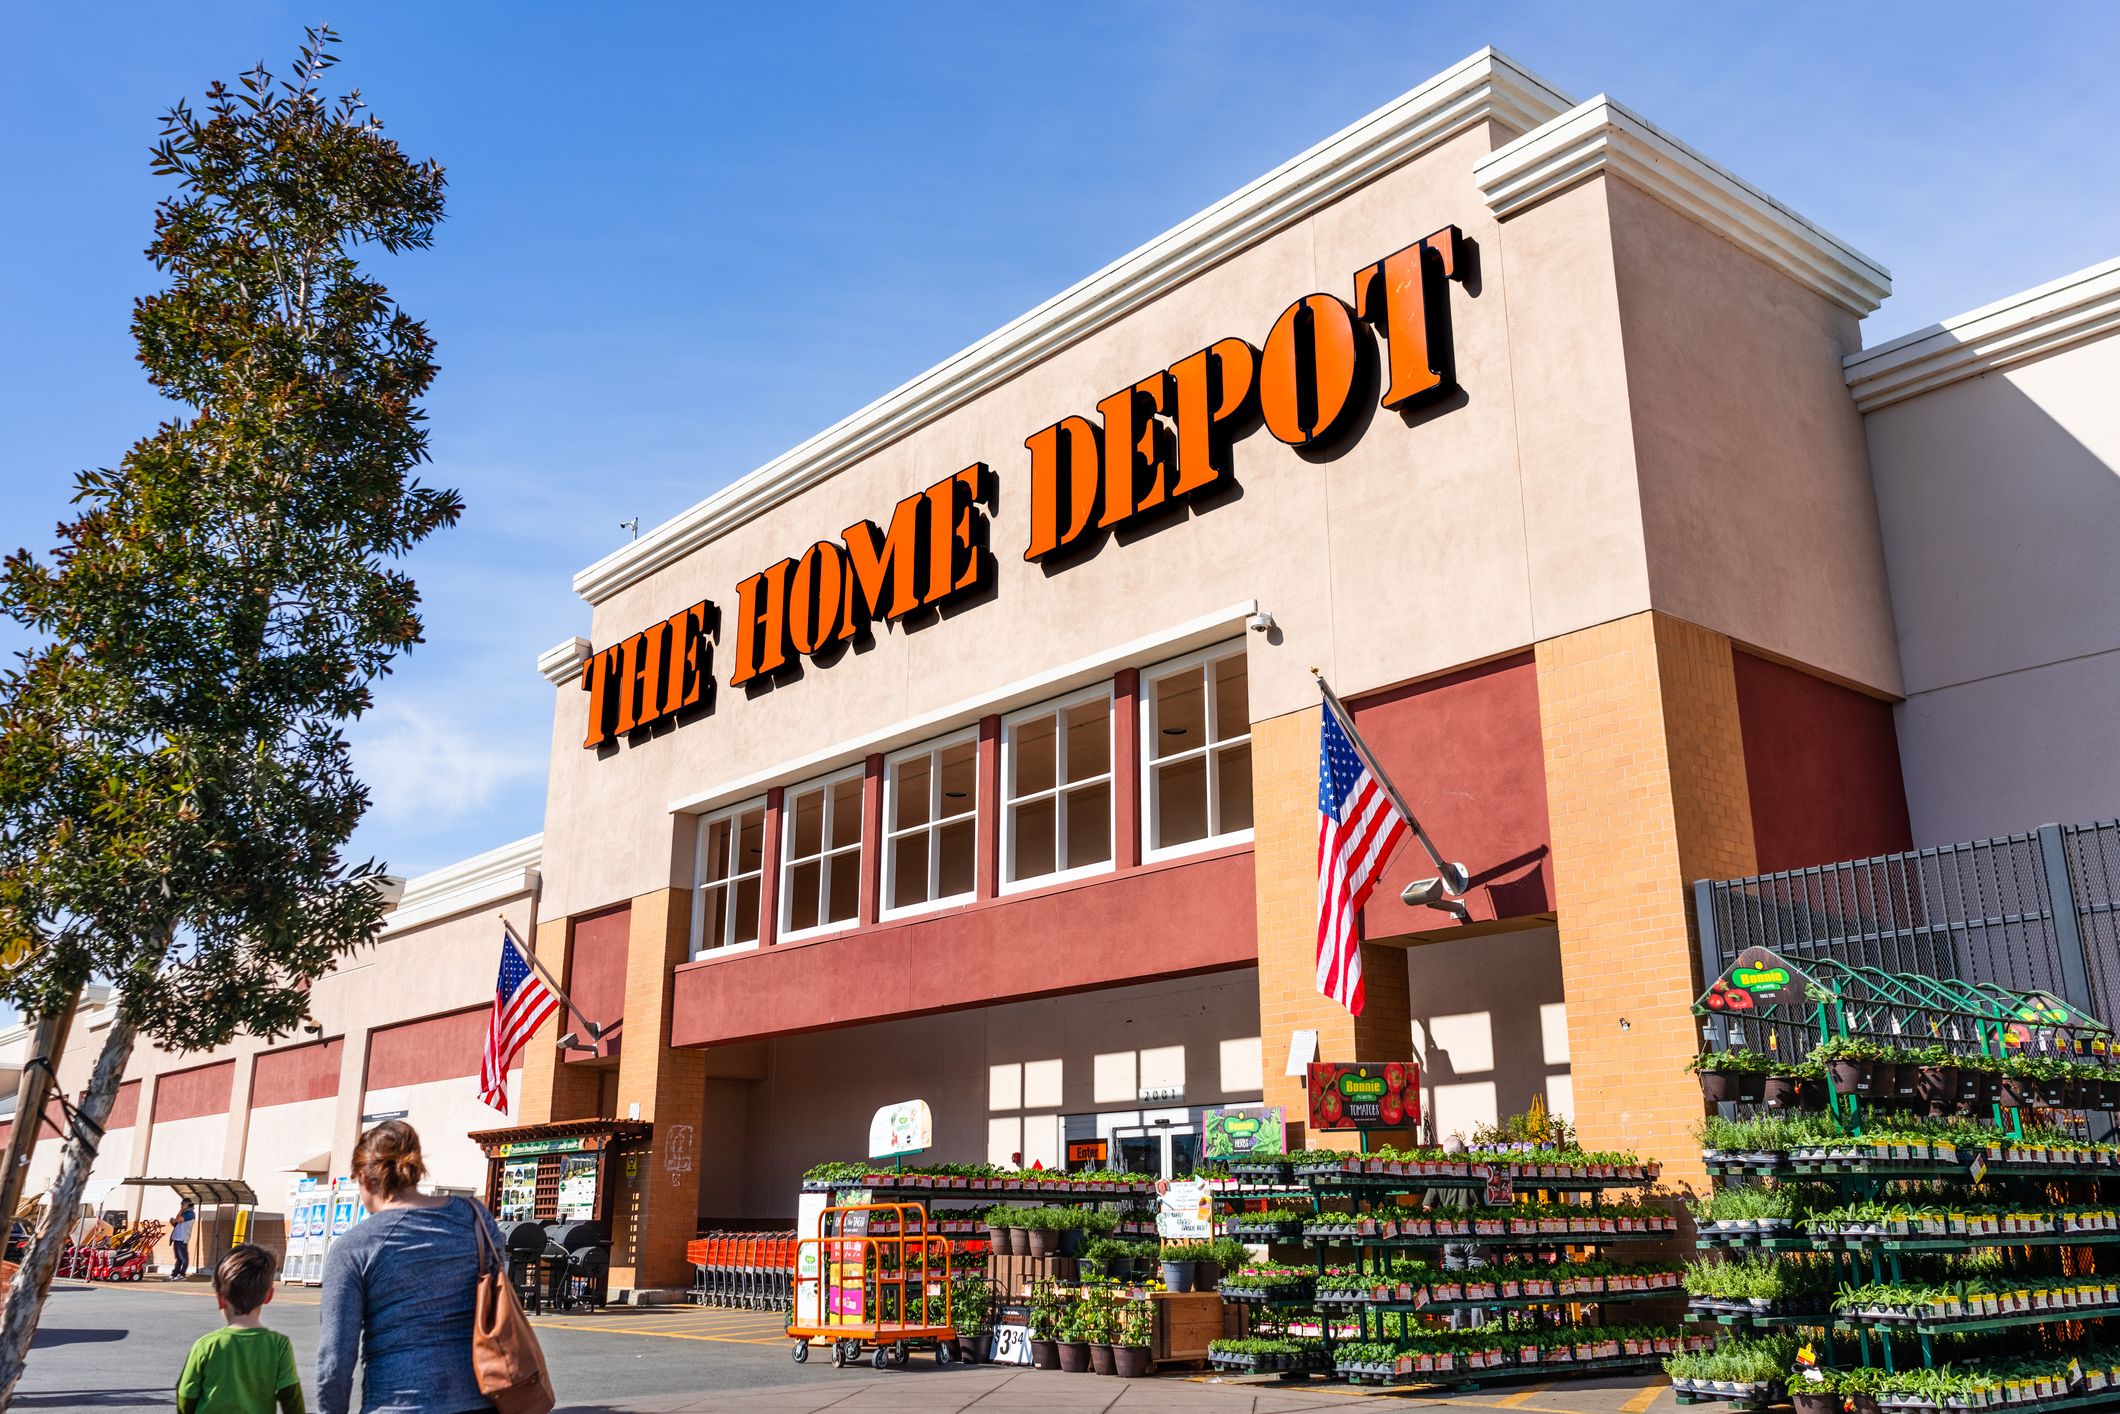 Philadelphia Home Depot workers vote to reject 1st store-wide